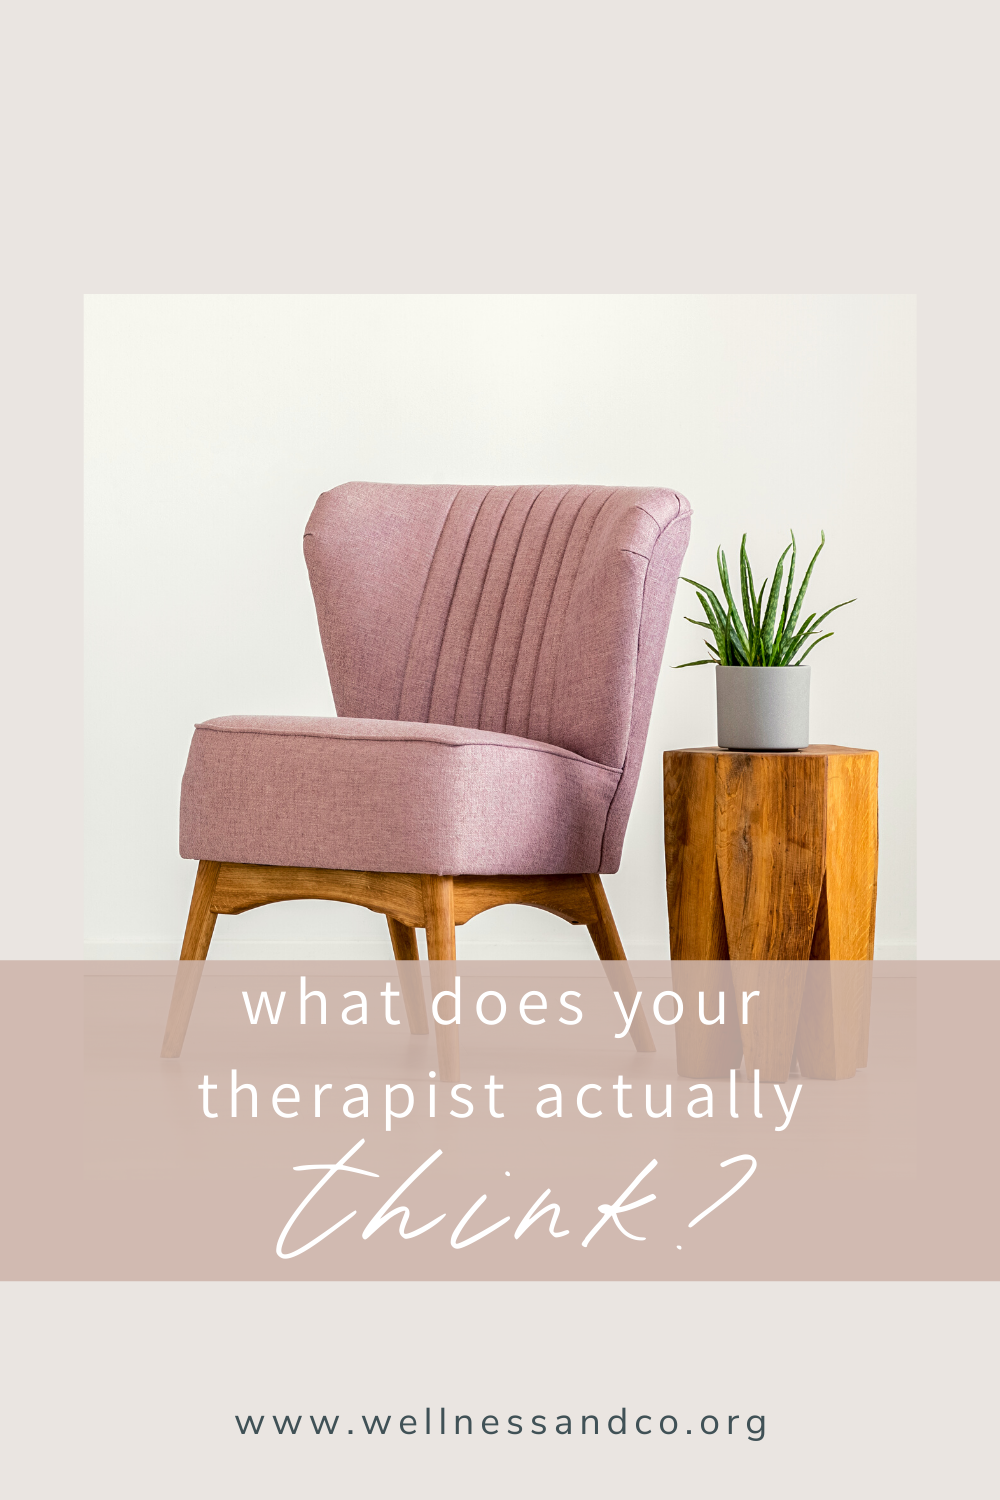 What Does Your Therapist Actually Think? | In that chair is a poem series by Dr. Kendra A. O'Hora, a licensed clinical marriage and family therapist. This expressive writing in the form of poetry gives clients, couples, and the world inside access into the mind of a therapist - what they see and how they are impacted every day. Curious to know what your therapist actually think? Read on, cheers! 